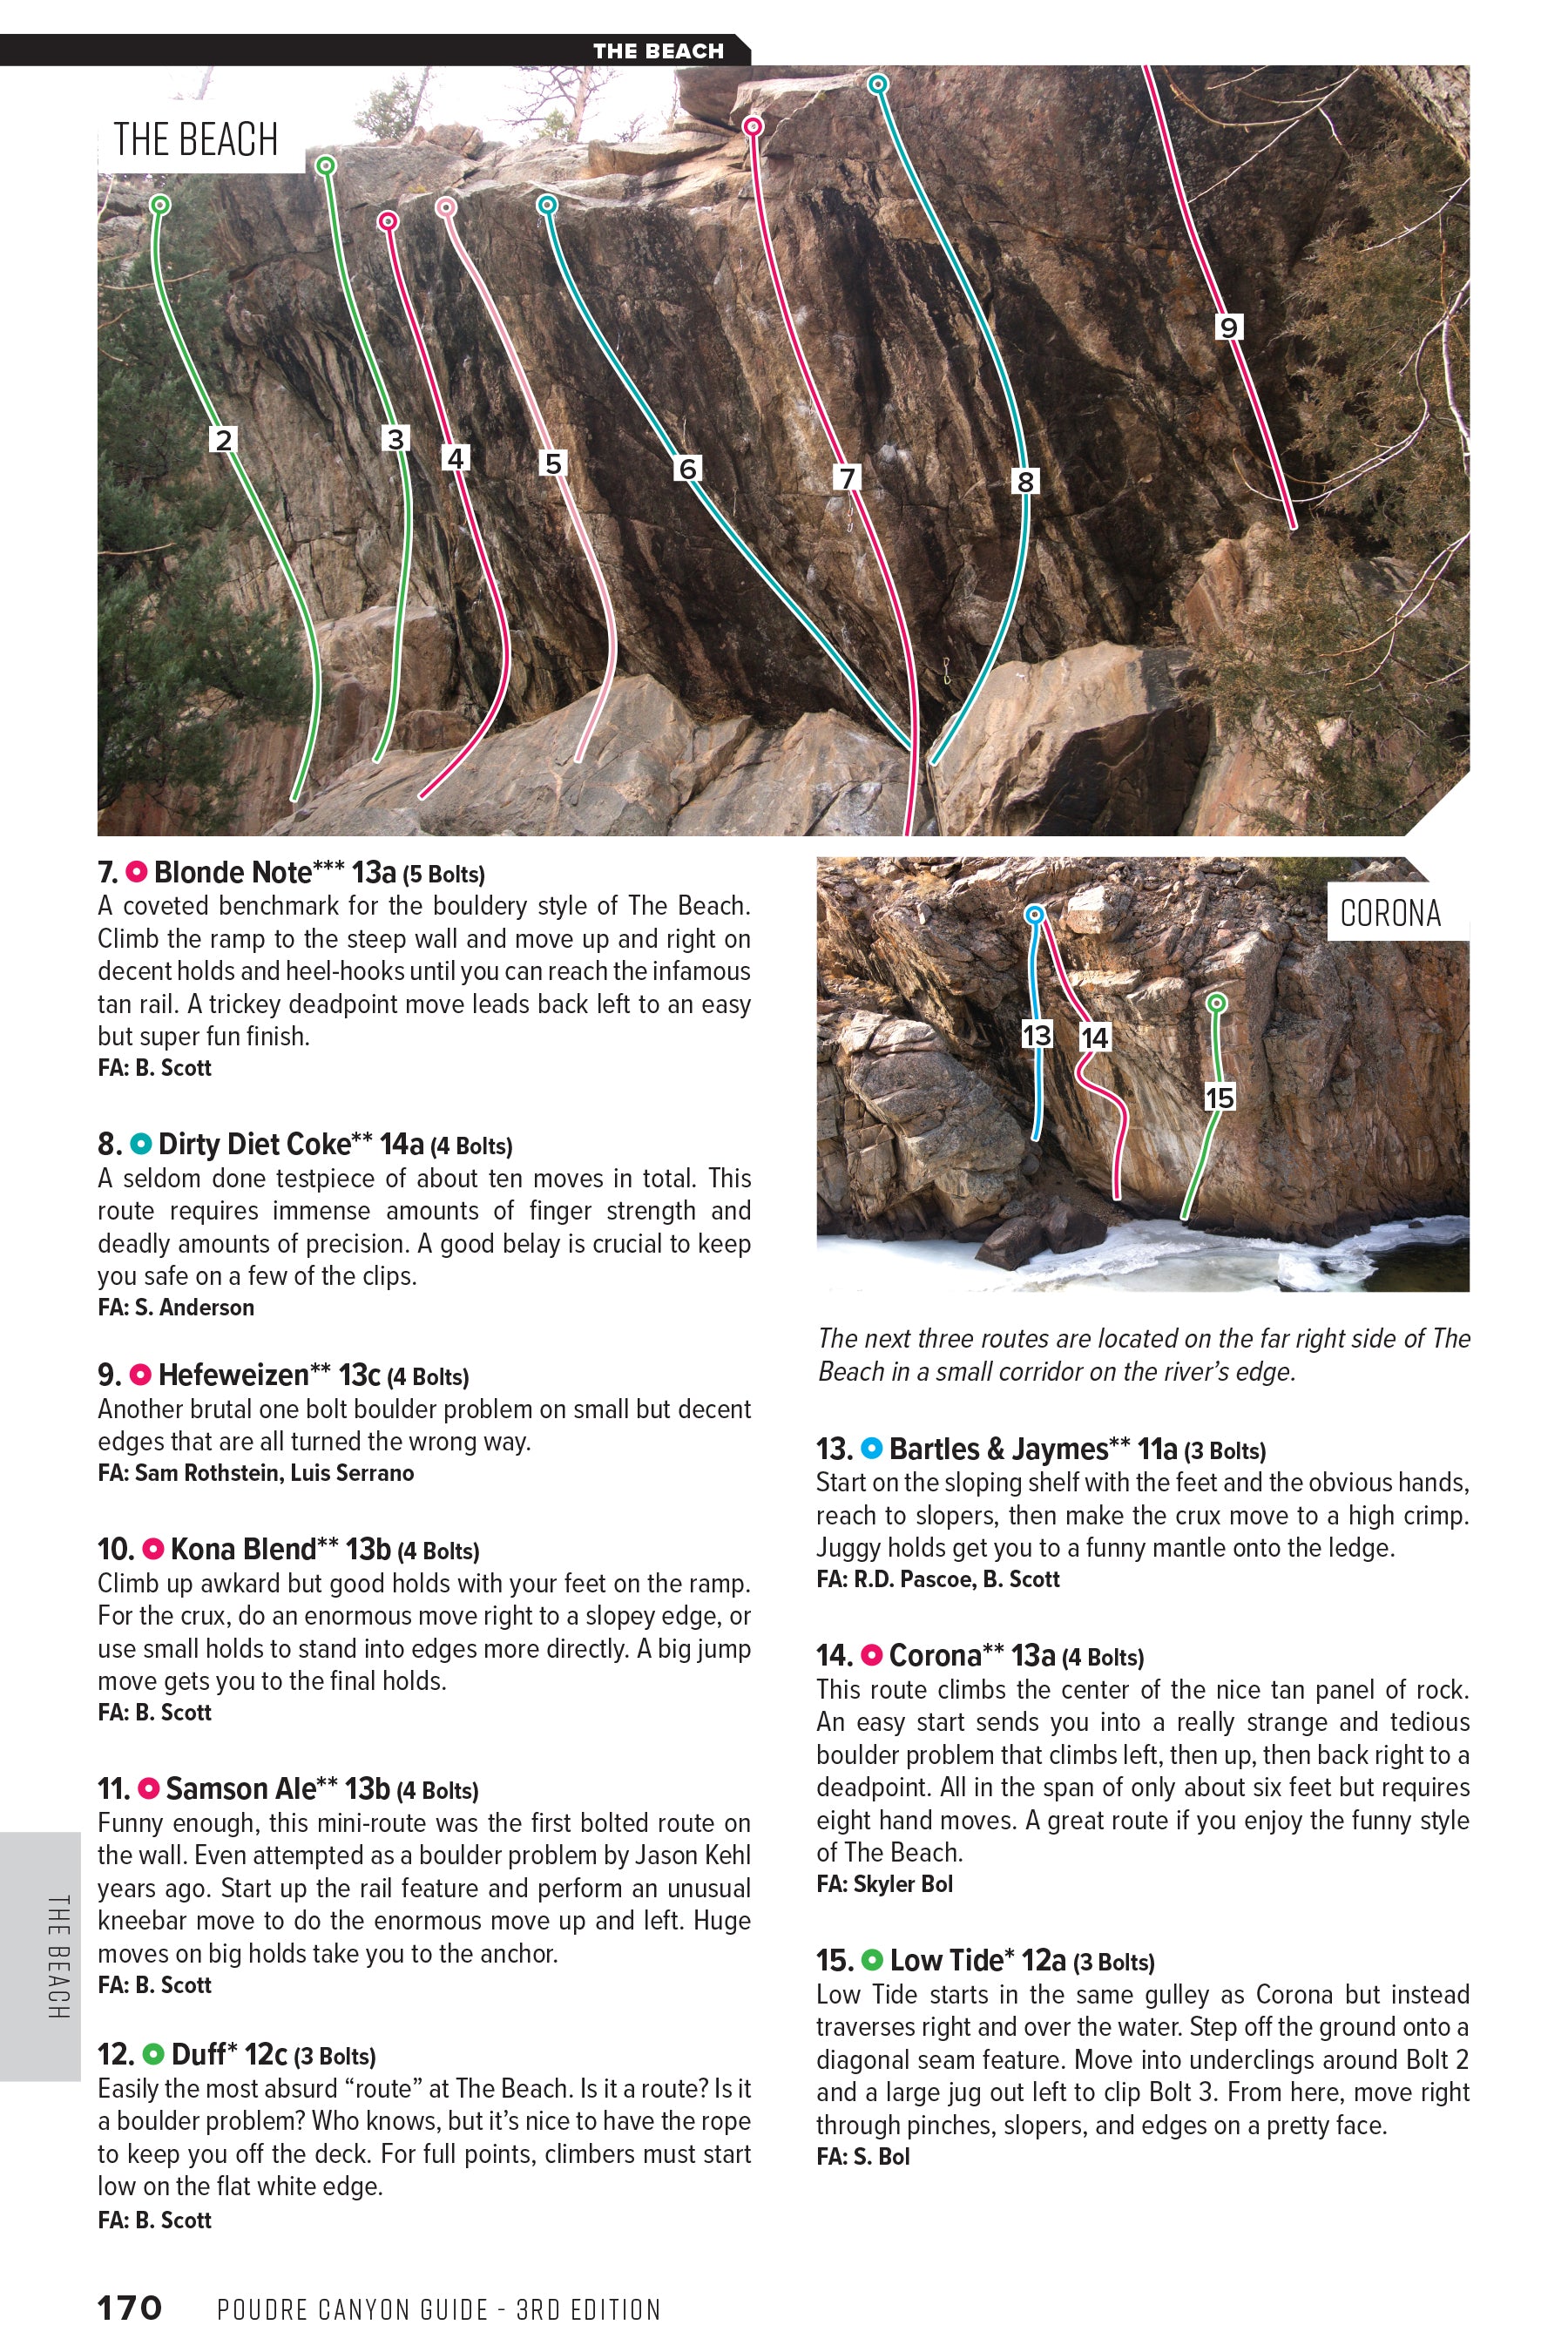 Poudre Canyon (Fort Collins) Rock Climbing Guidebook 3rd edition